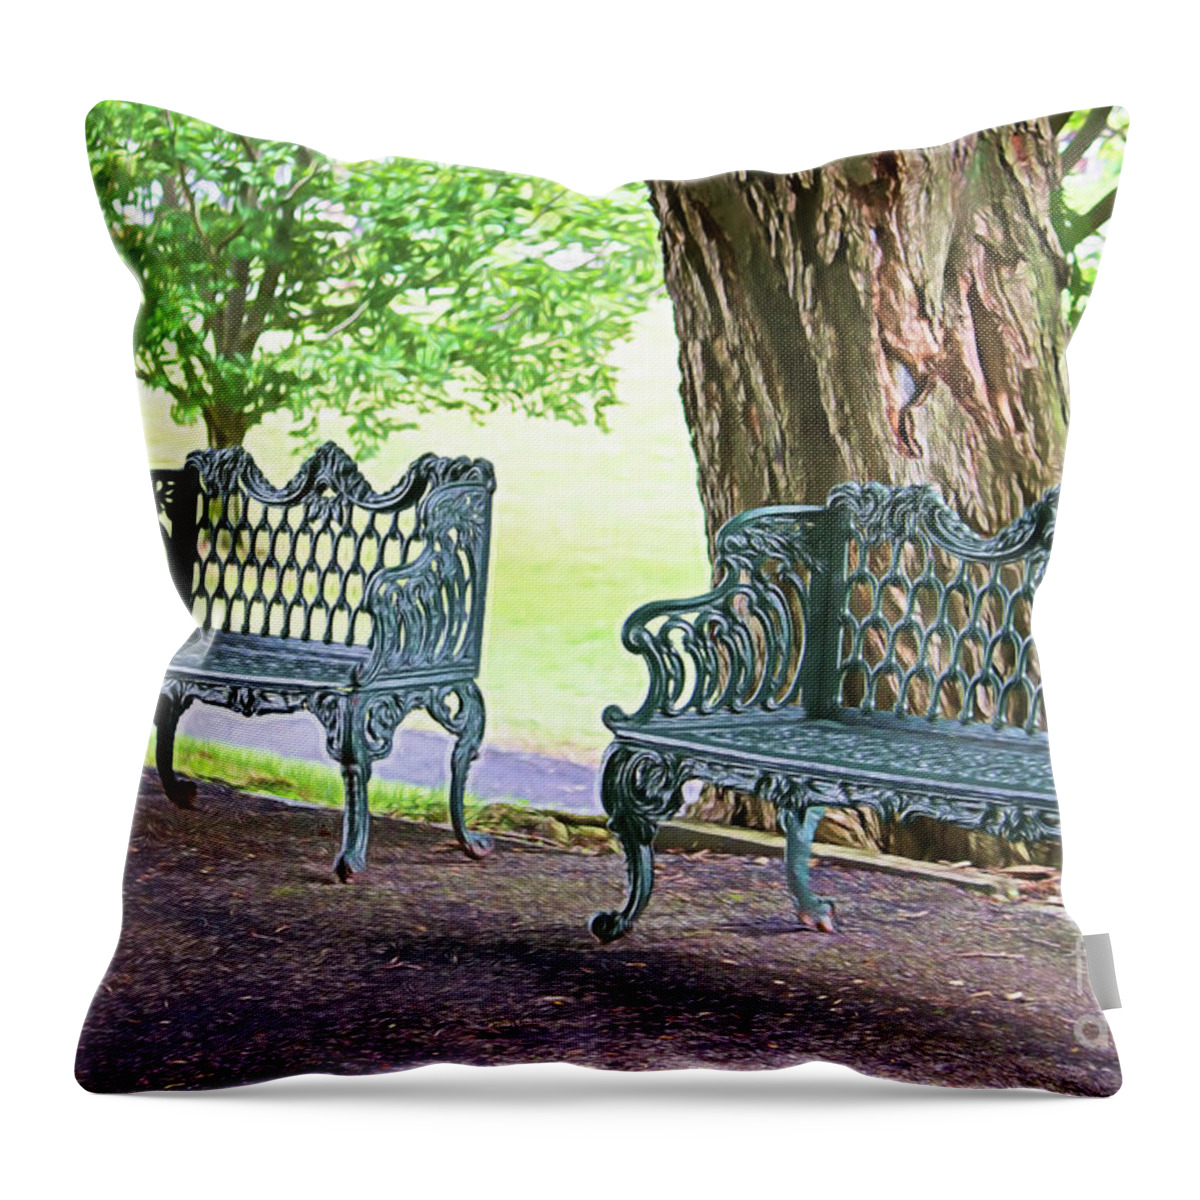 Benches Throw Pillow featuring the photograph Come and Sit Benches by Roberta Byram